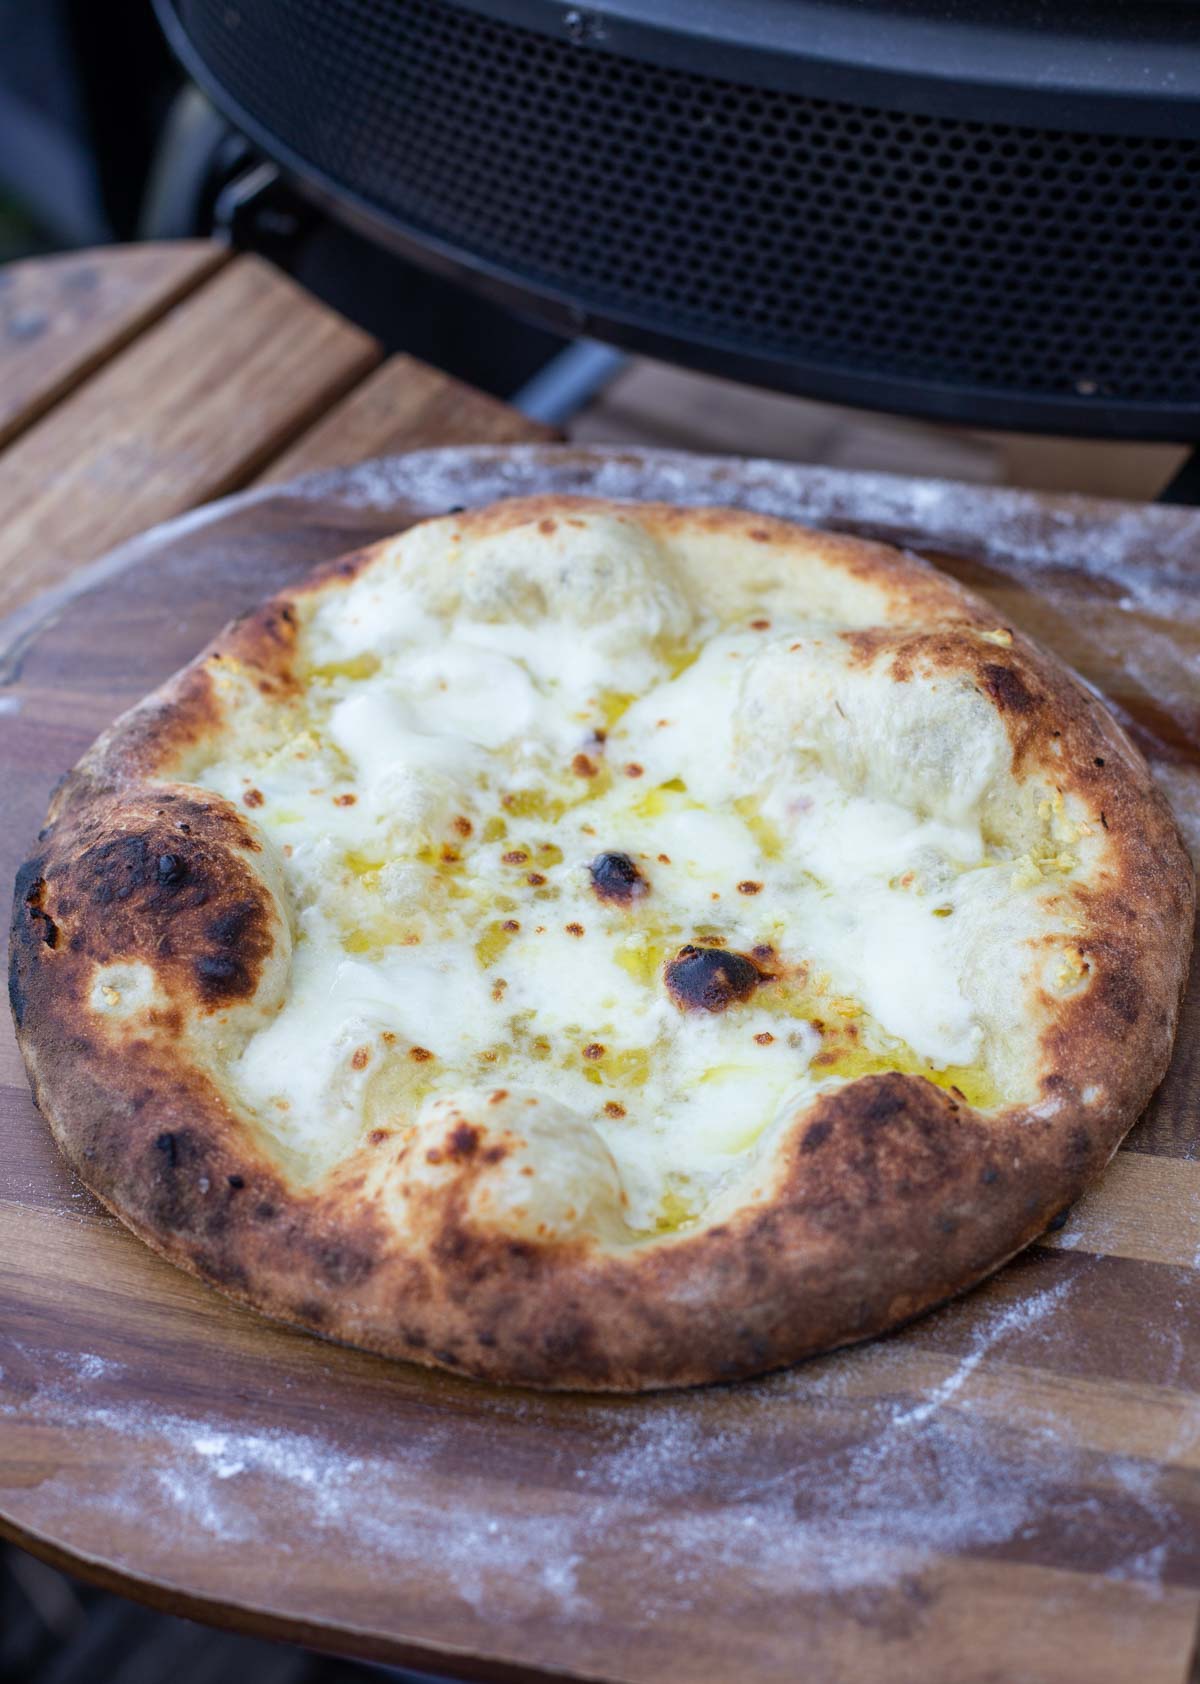 Cooked Garlic pizza before being topped.